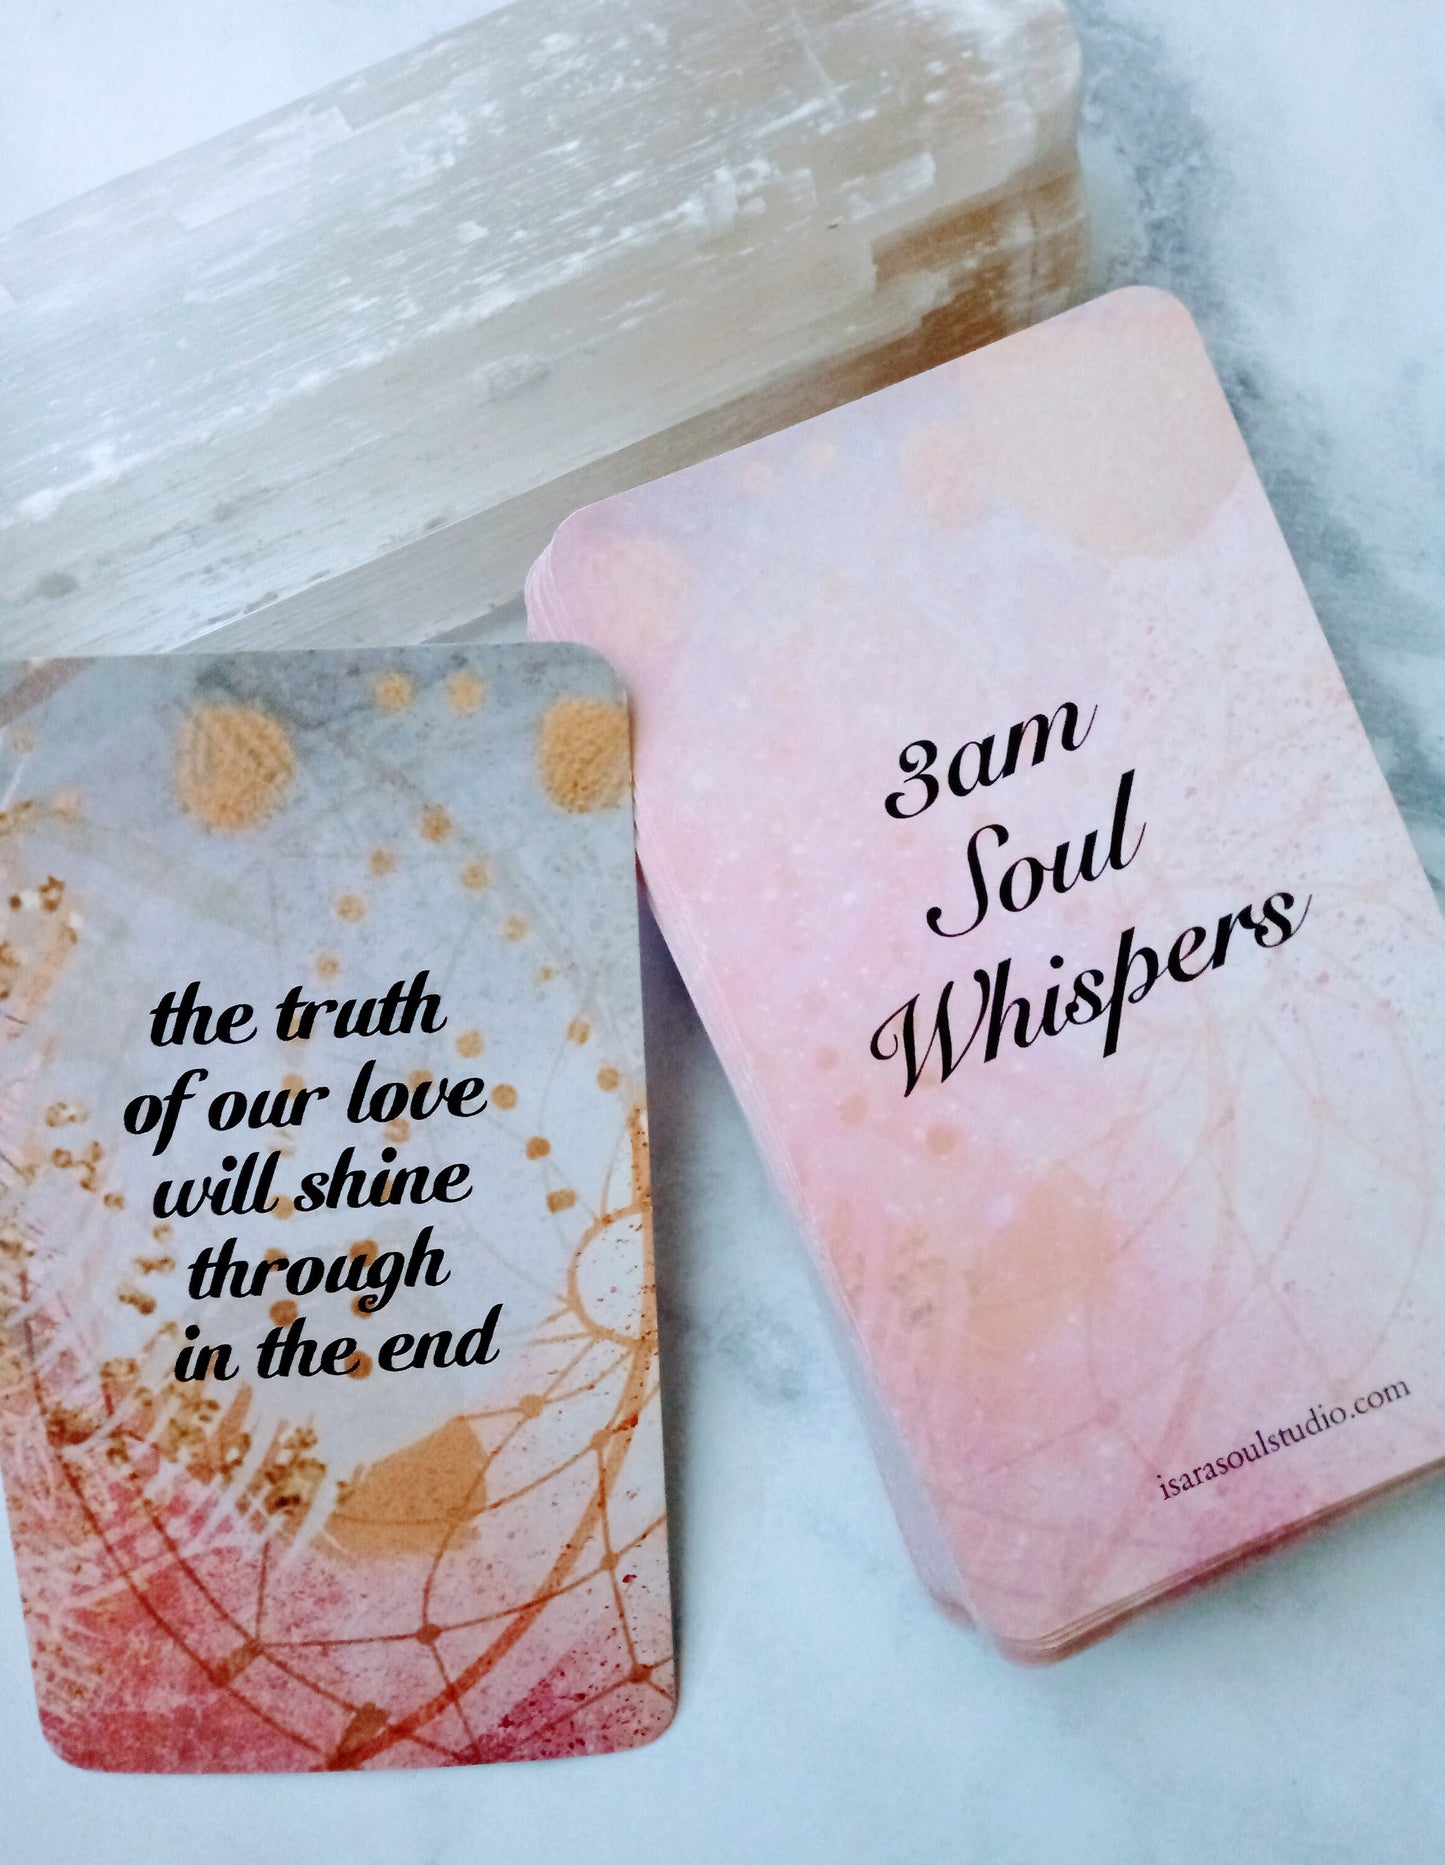 Soul Whispers 3am  love messages